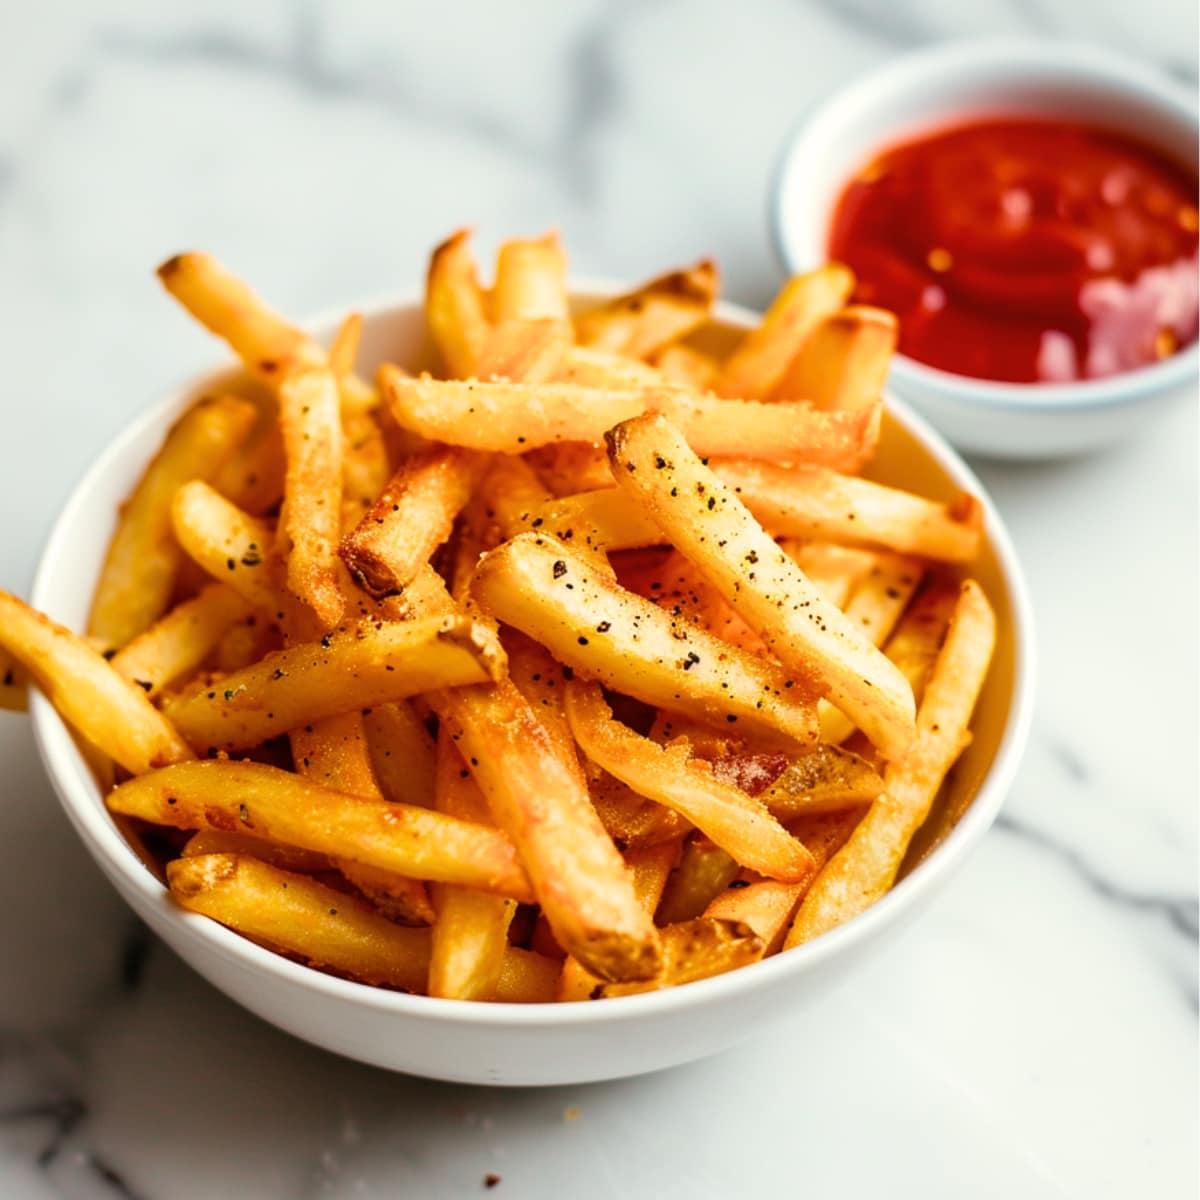 Bowl of fries seasoned with pepper and ketchup on the sides. 